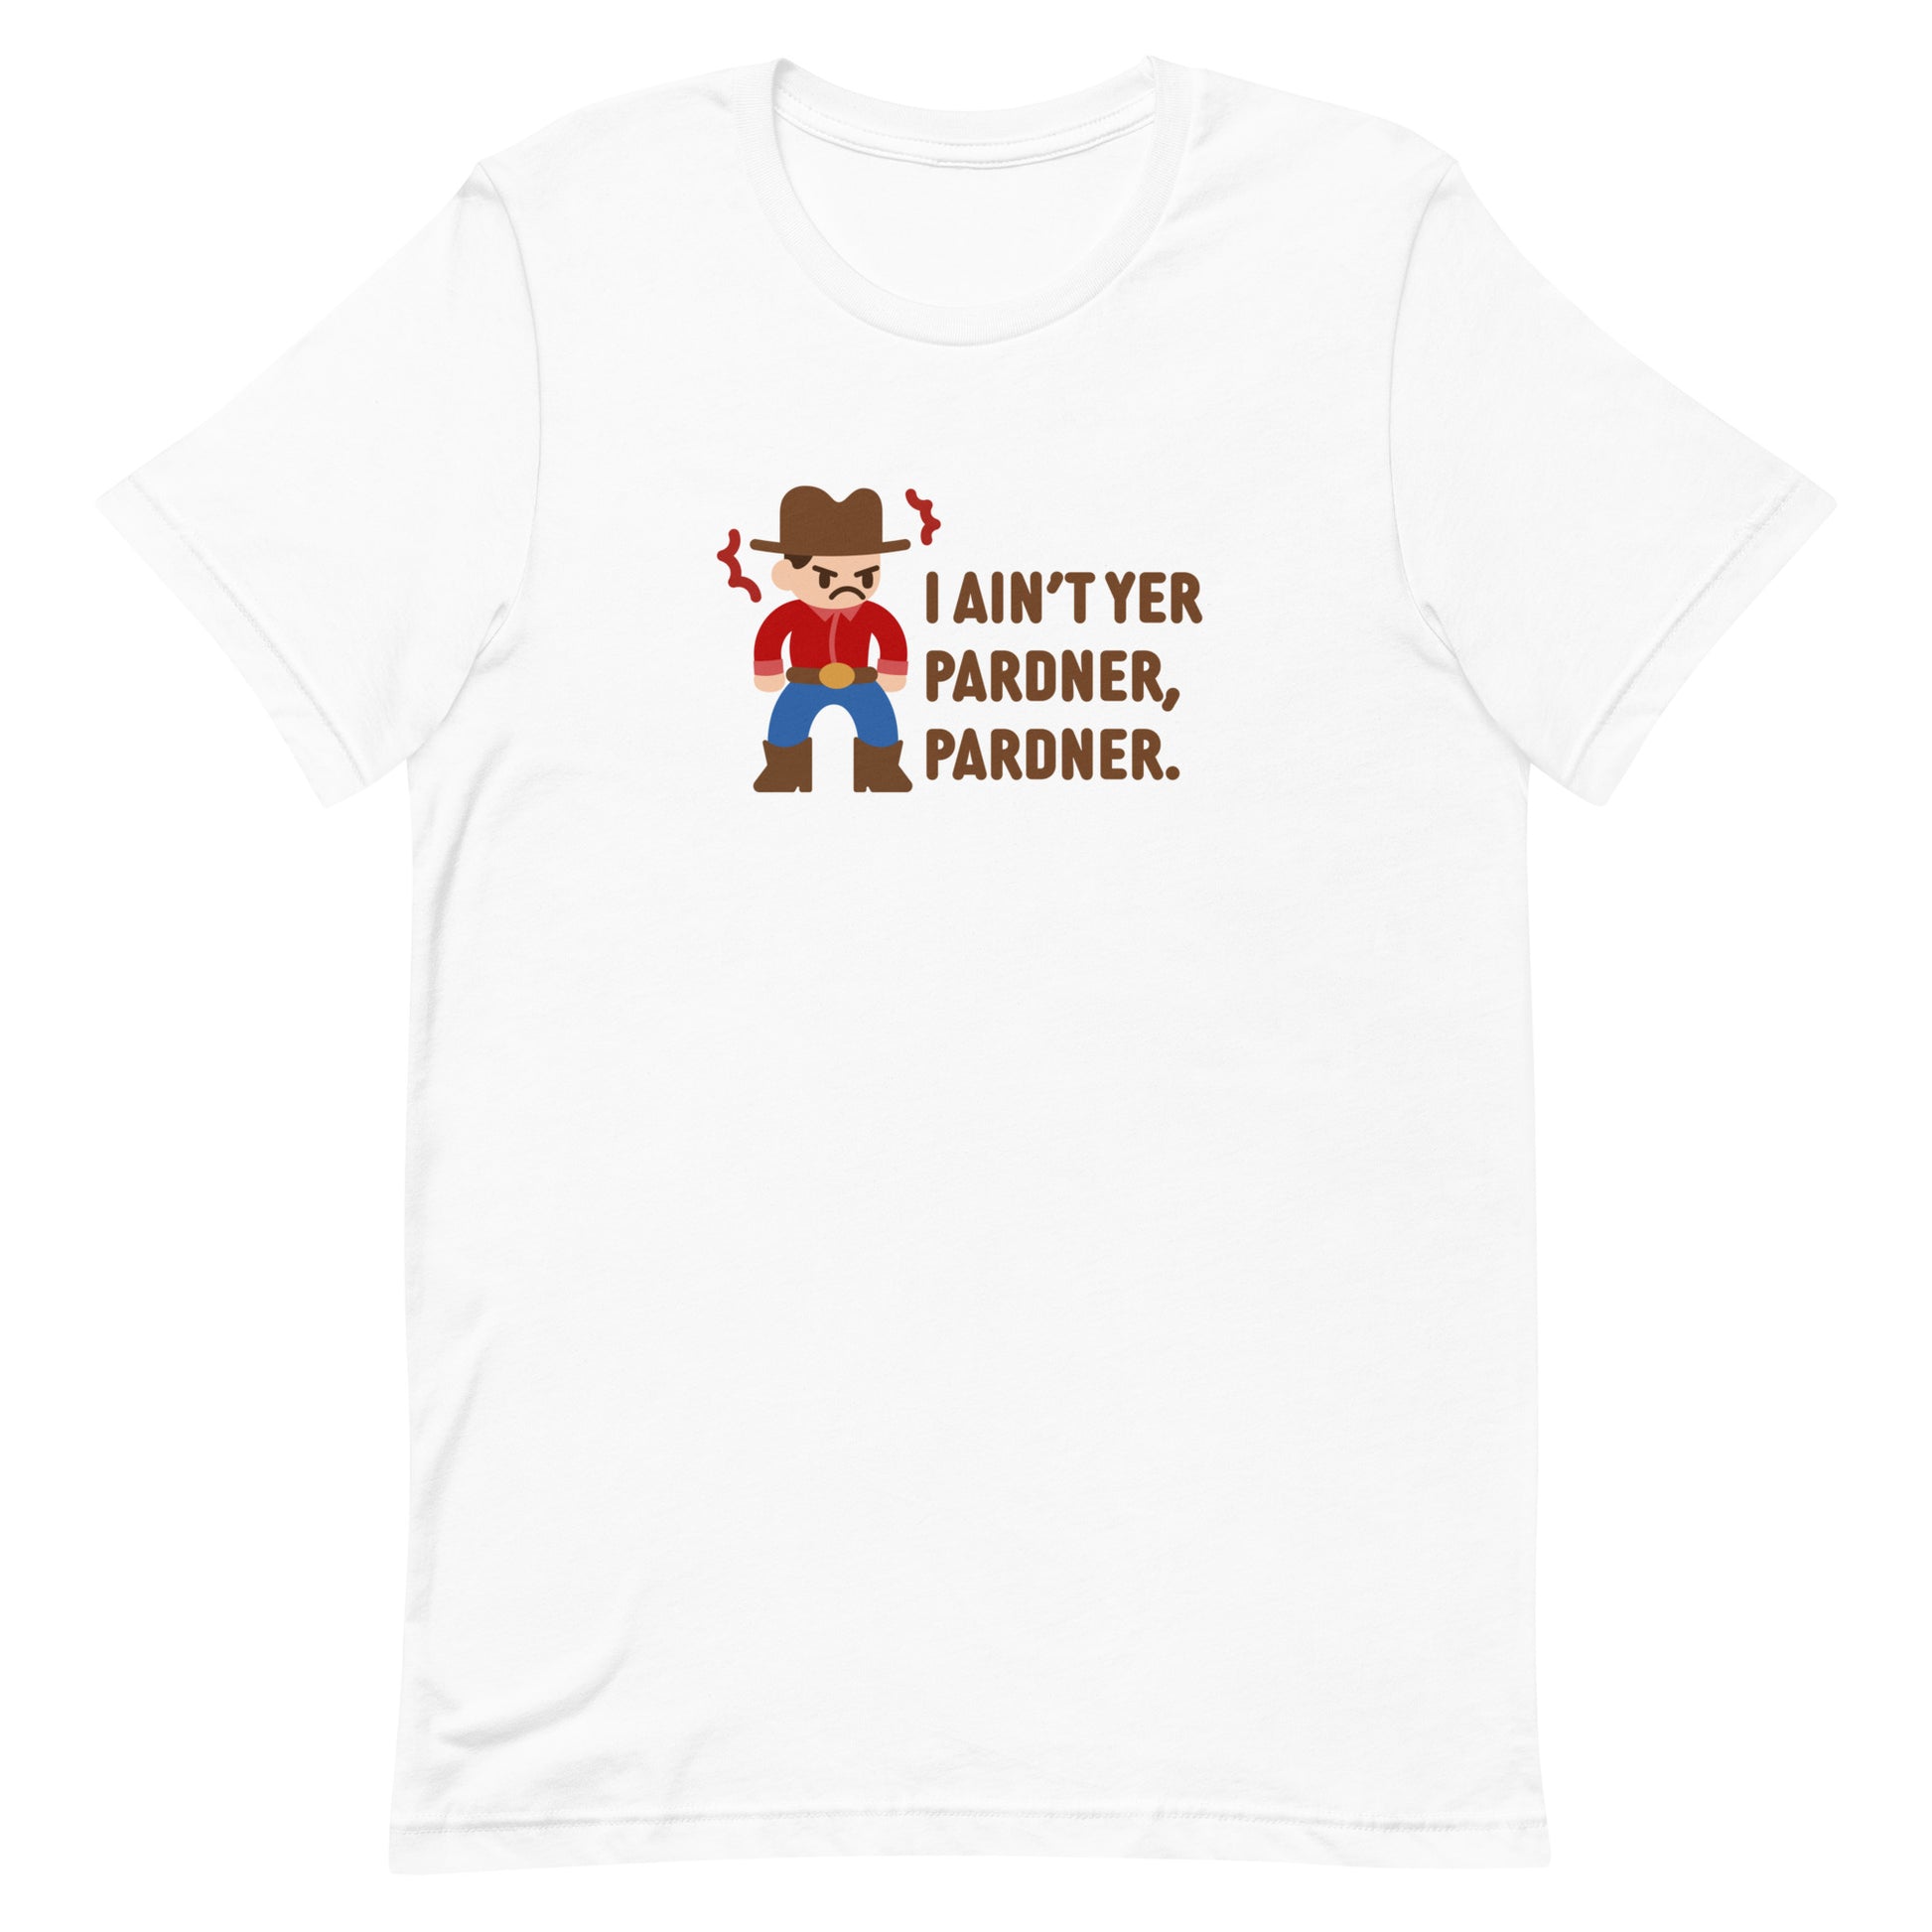 A white crewneck t-shirt featuring an illustration of a grumpy cowboy wearing a red shirt. Text alongside the cowboy reads "I ain't yer pardner, pardner."